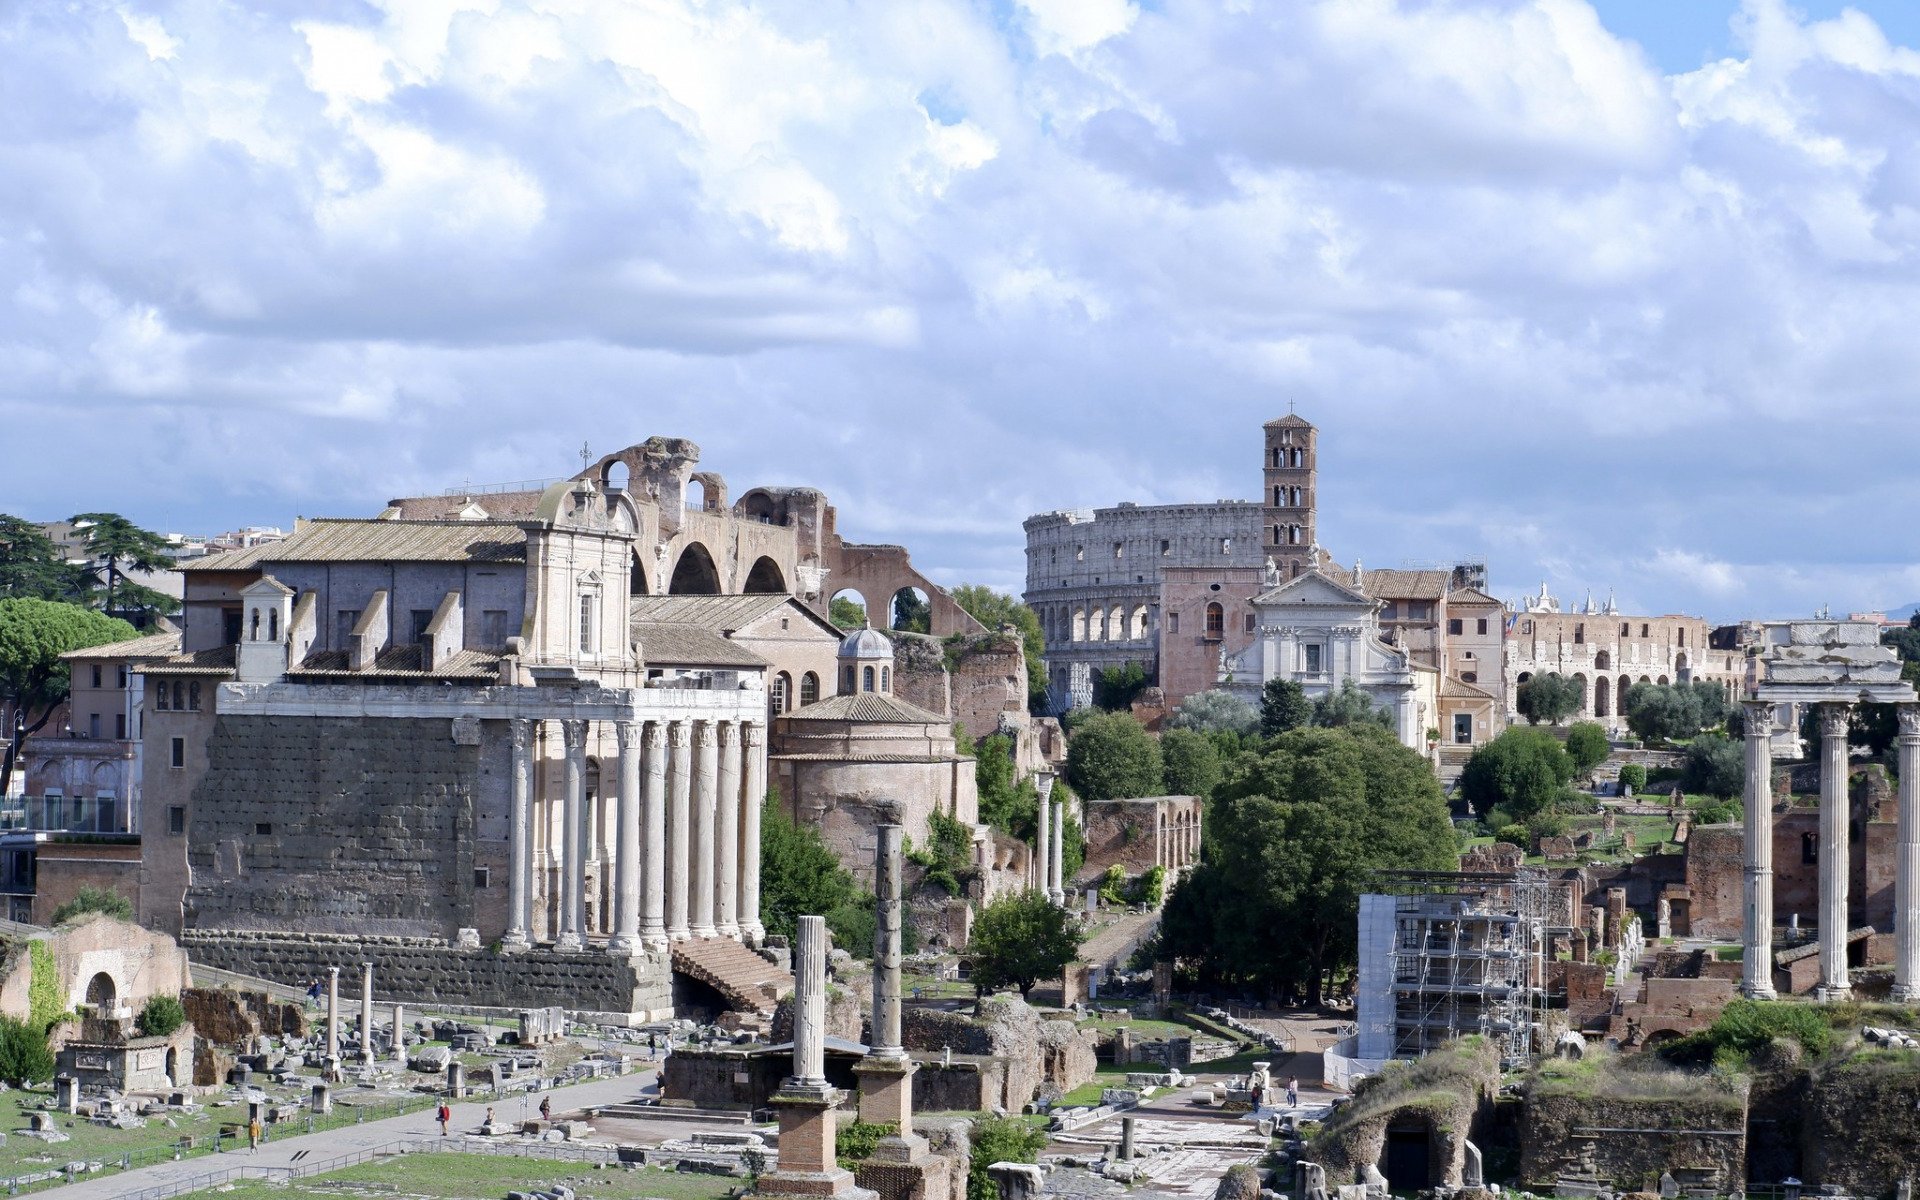 Download wallpaper Roman Forum, Rome, Temple of Saturn, Colosseum, ruins, landmark, Rome cityscape, Italy for desktop with resolution 1920x1200. High Quality HD picture wallpaper